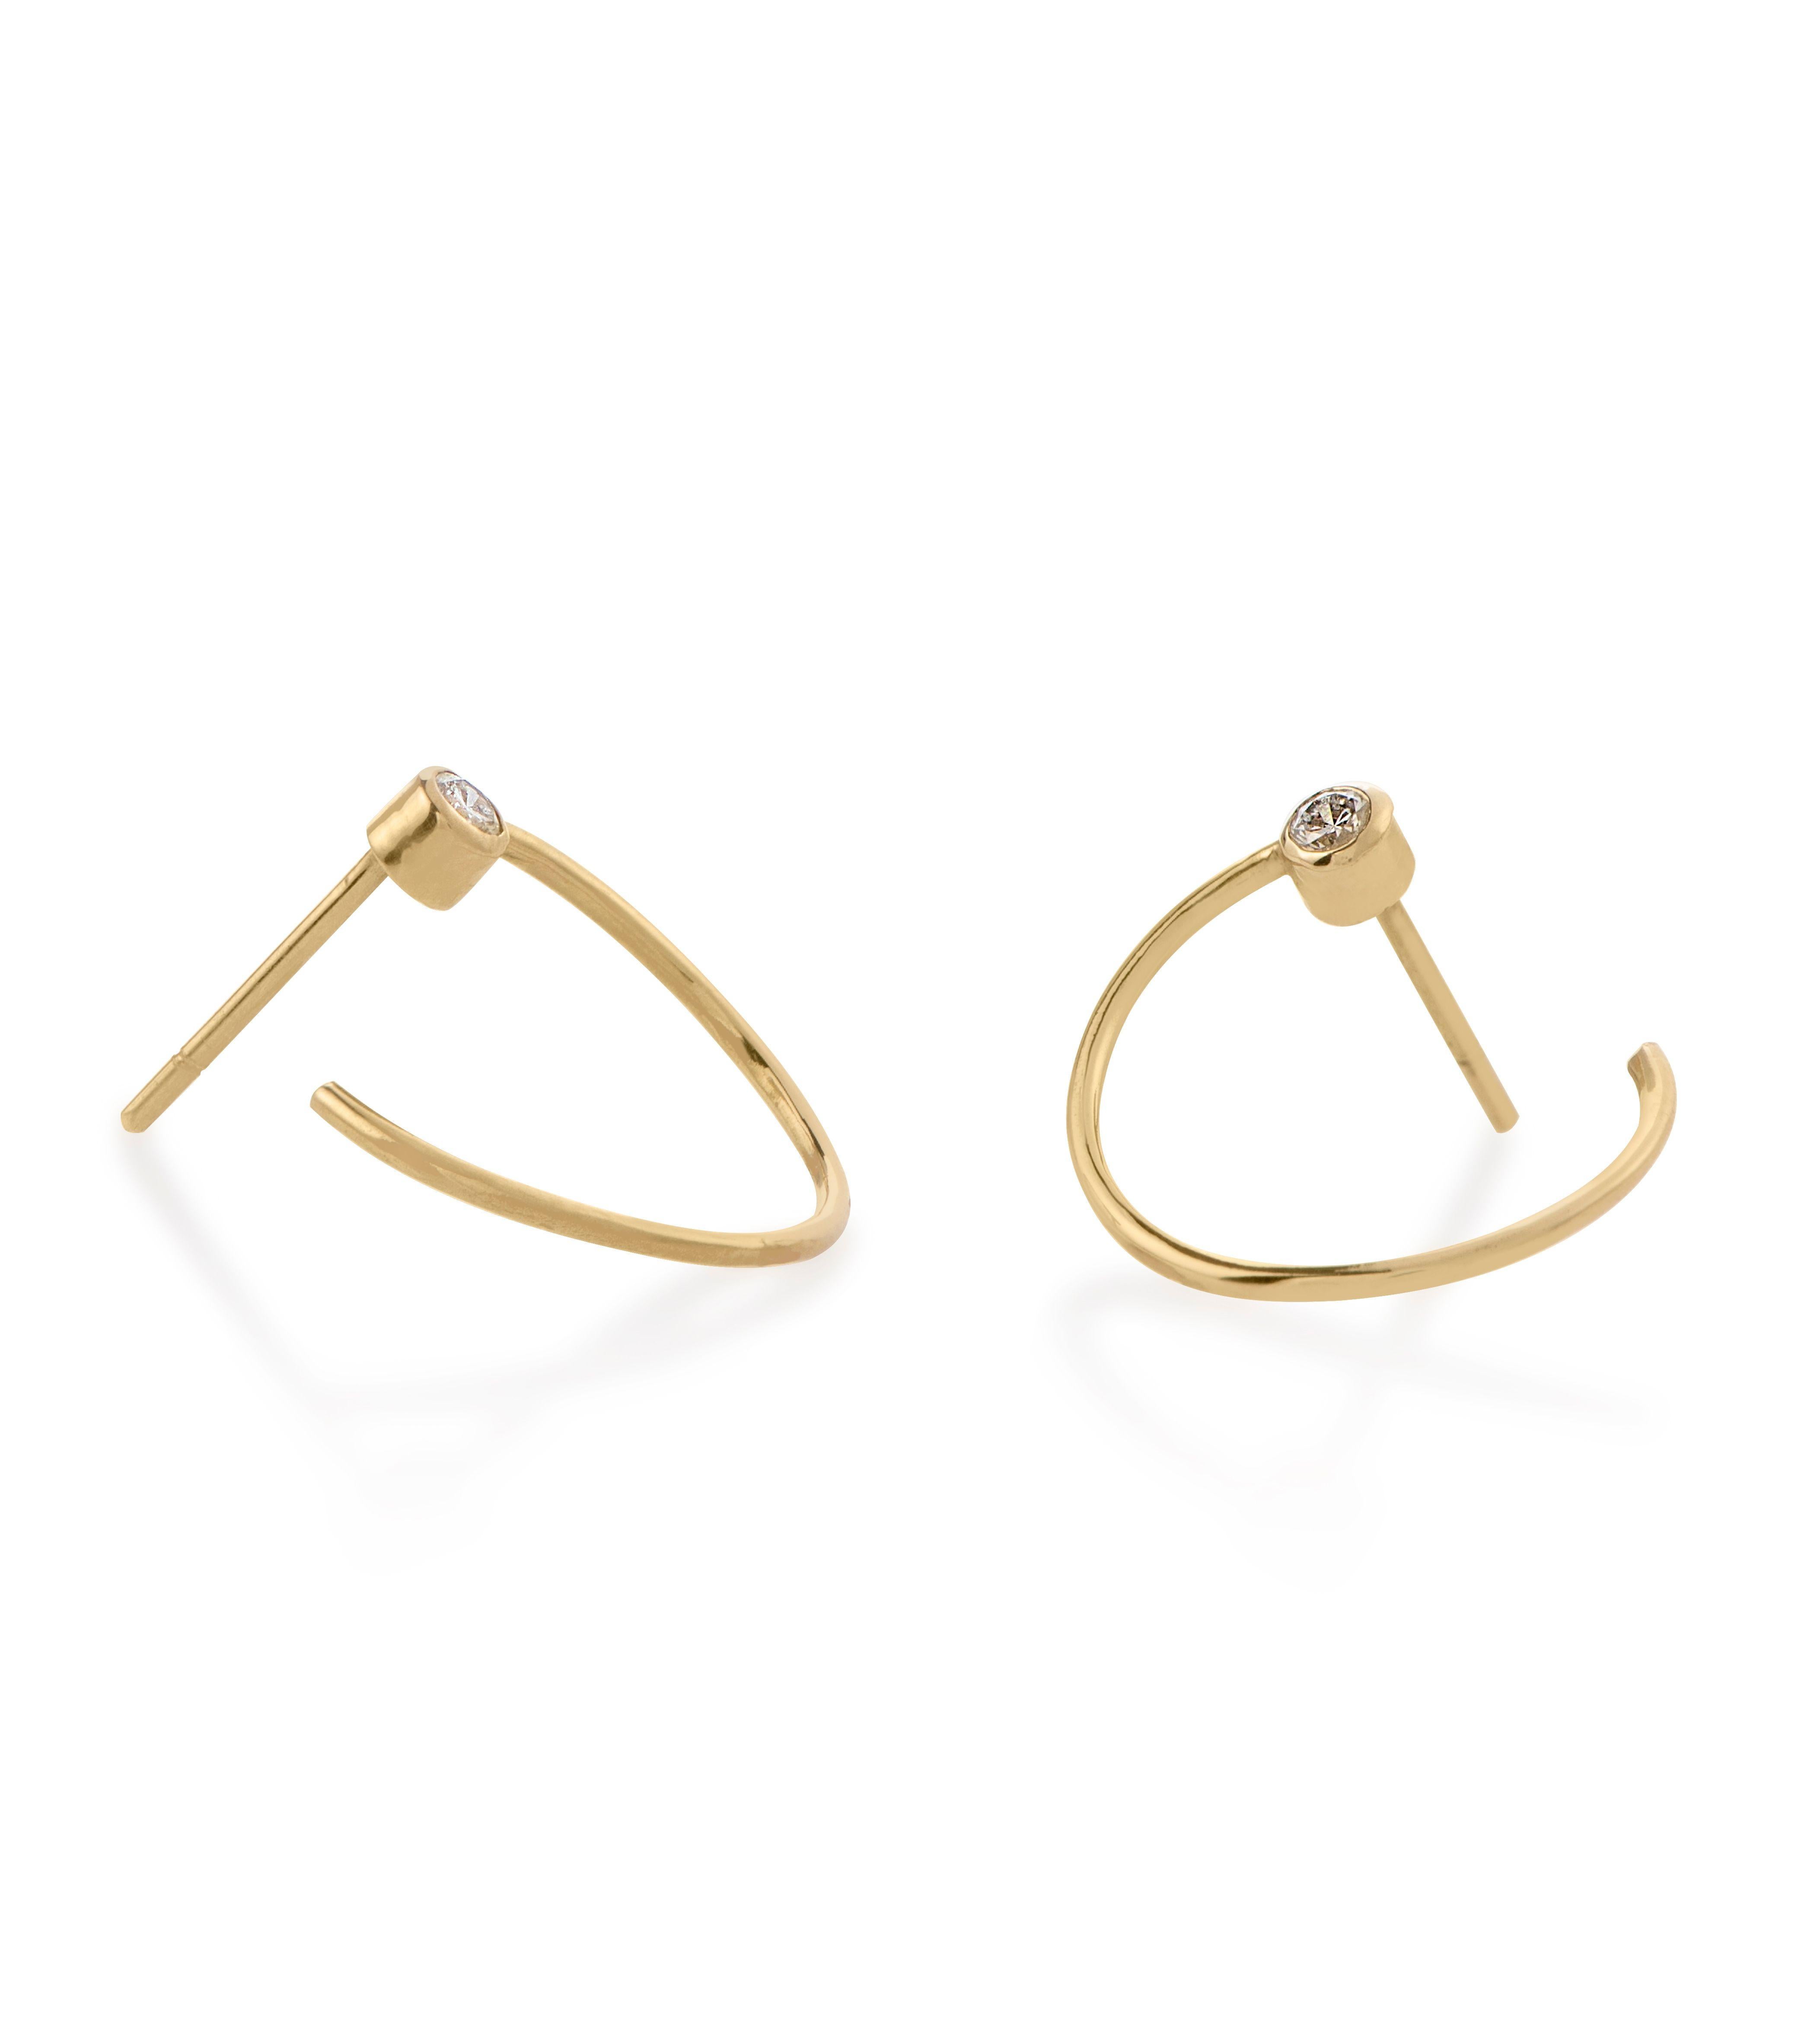 The Eternal Hoop Earrings are handcrafted in 18Karat yellow gold and illuminated by bezel set natural diamonds. Their modern and minimal silhouette makes them ideal for everyday wear.

All orders are delivered in a black velvet jewellery box, a gift